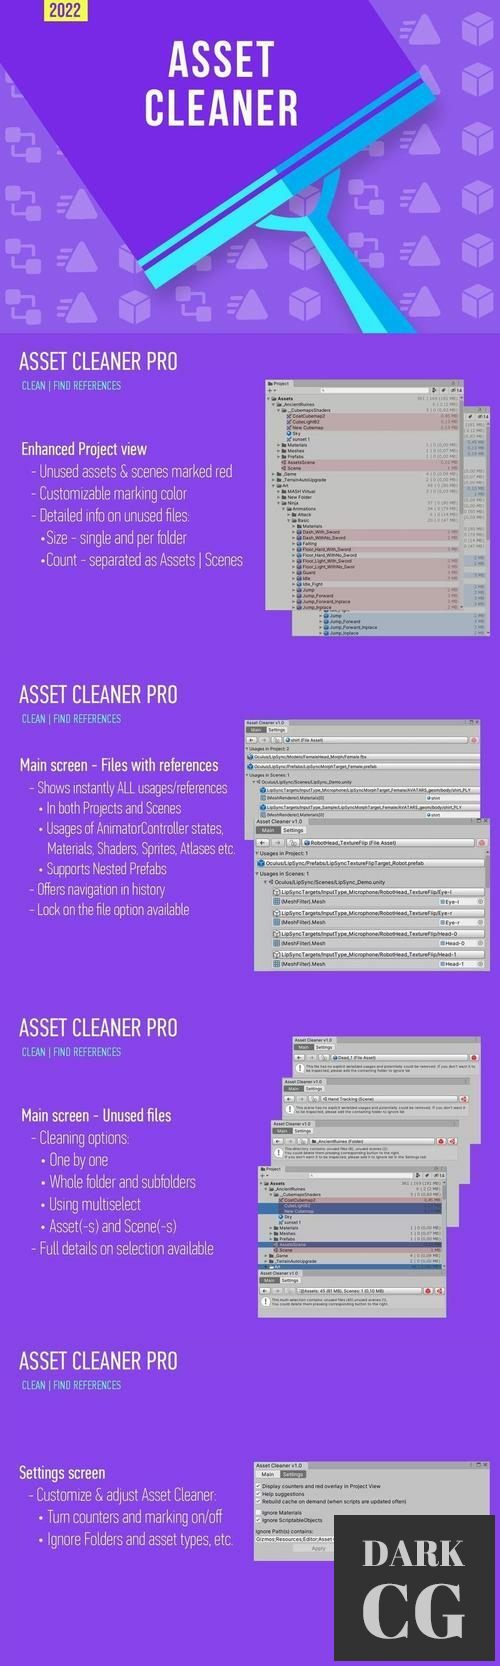 Unity Asset Store Asset Cleaner PRO Clean